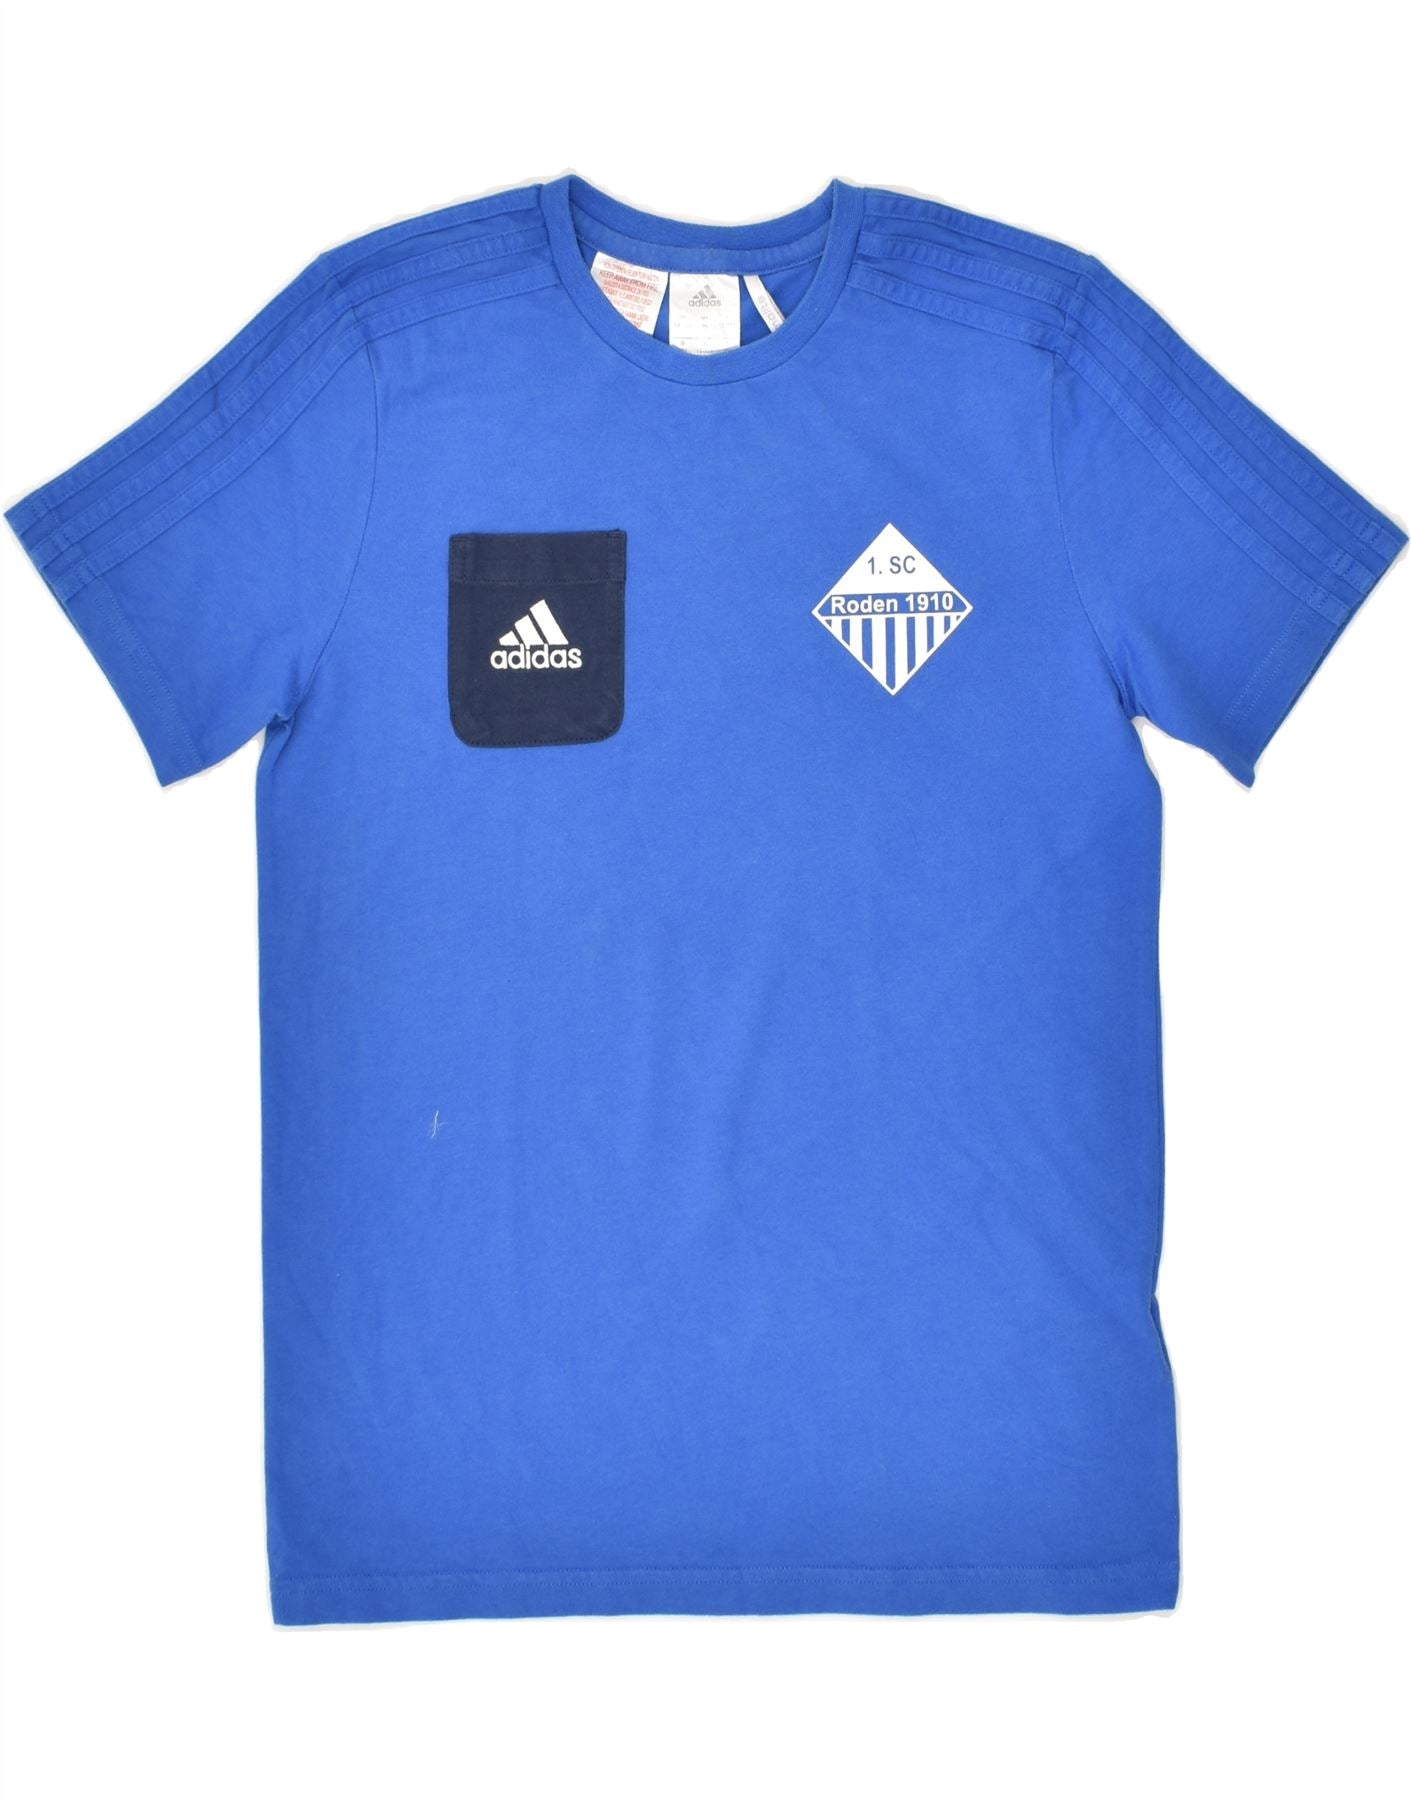 ADIDAS Boys Climalite Graphic T-Shirt Top 11-12 Years Blue Cotton